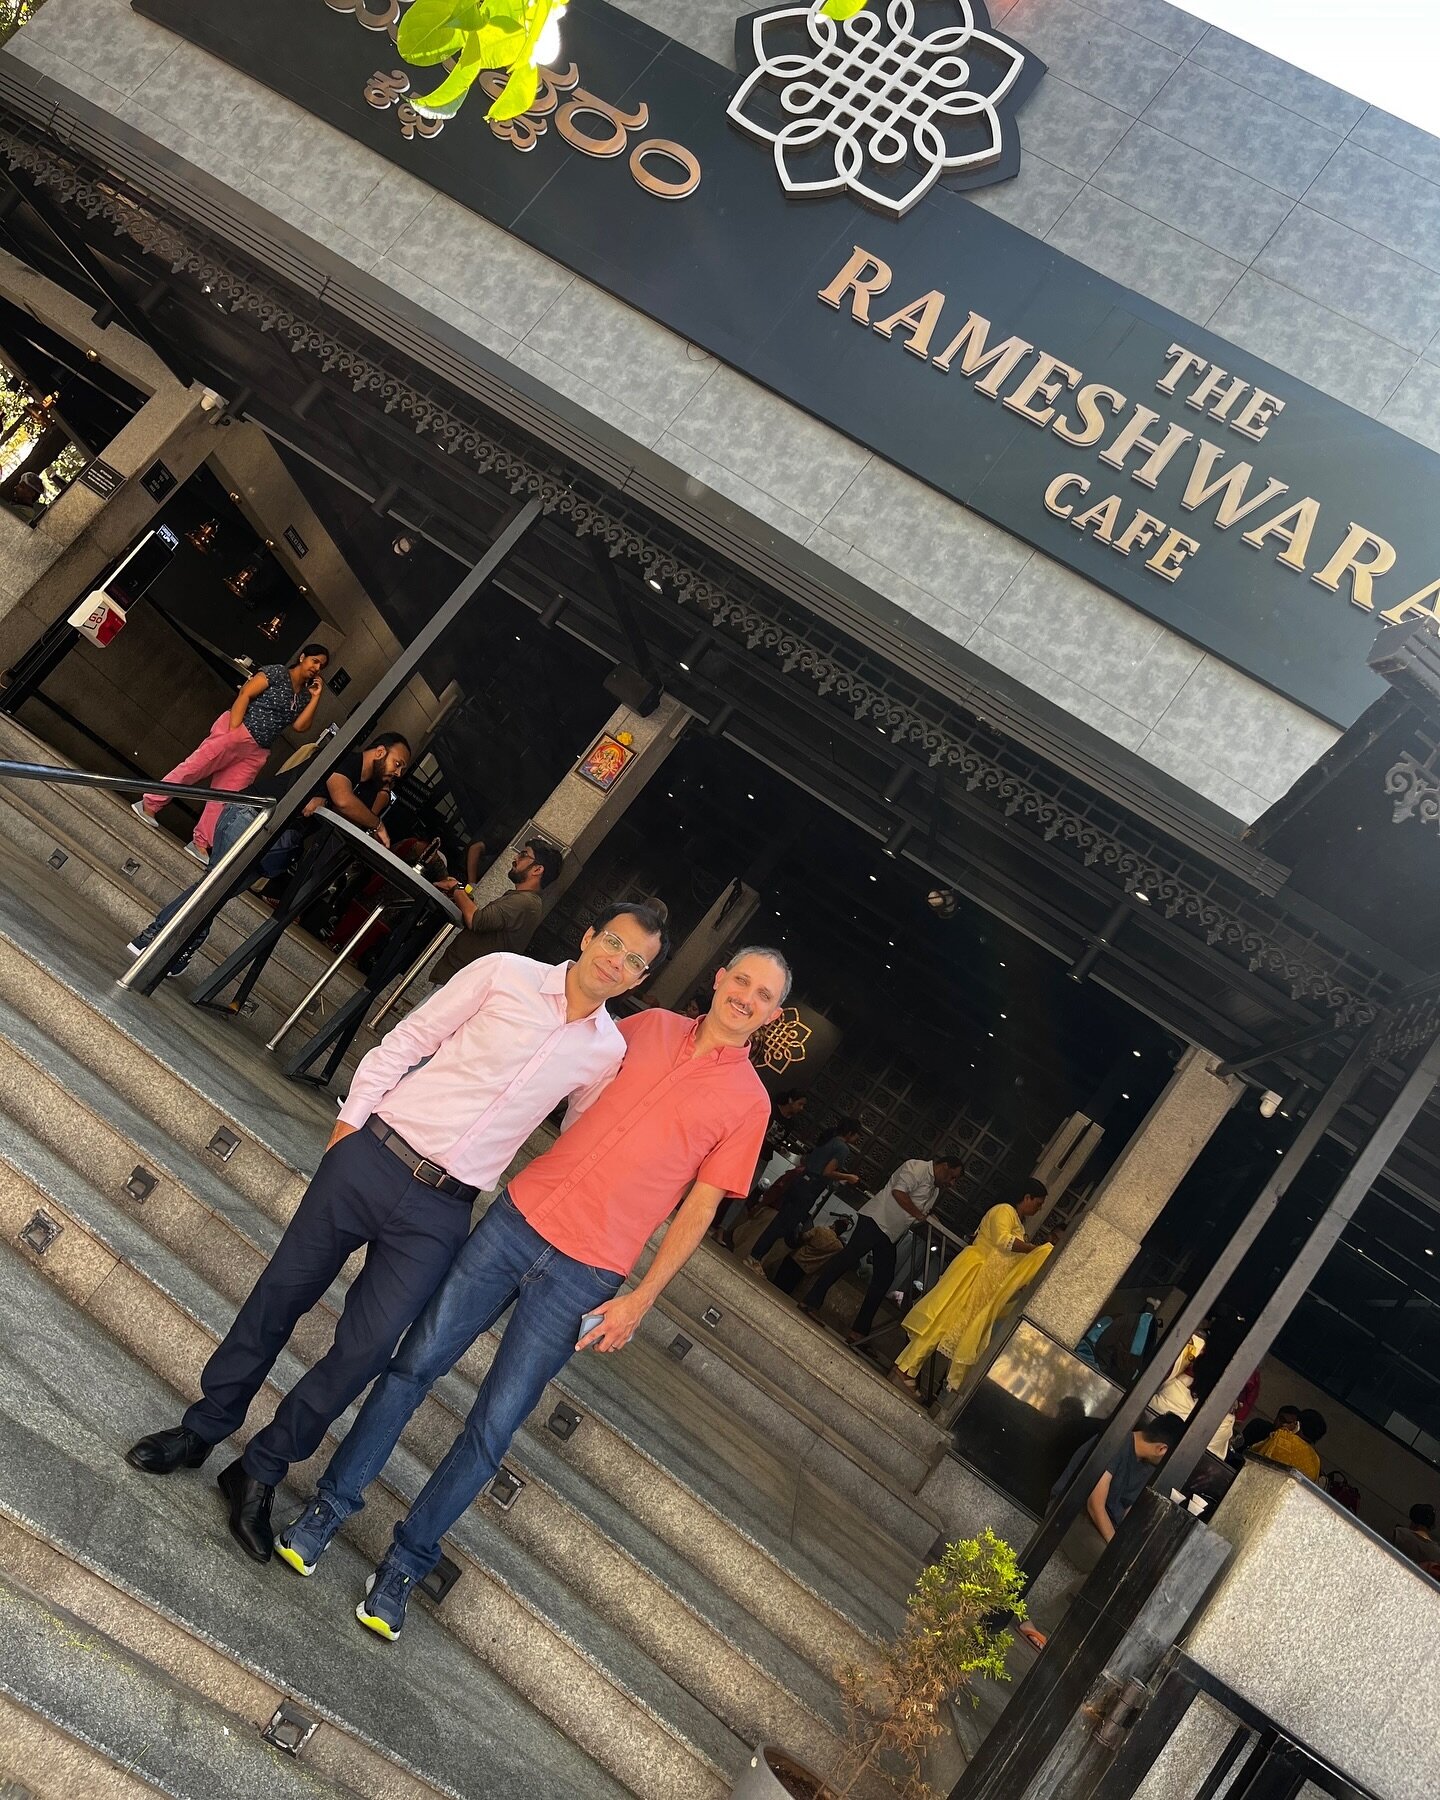 Our SVP, Fulfillment Operations, Jacob Weinstein was in town and of course we had to give him a taste of true Kannadiga culture at Rameshwaram cafe. It&rsquo;s been a pleasure hosting him!